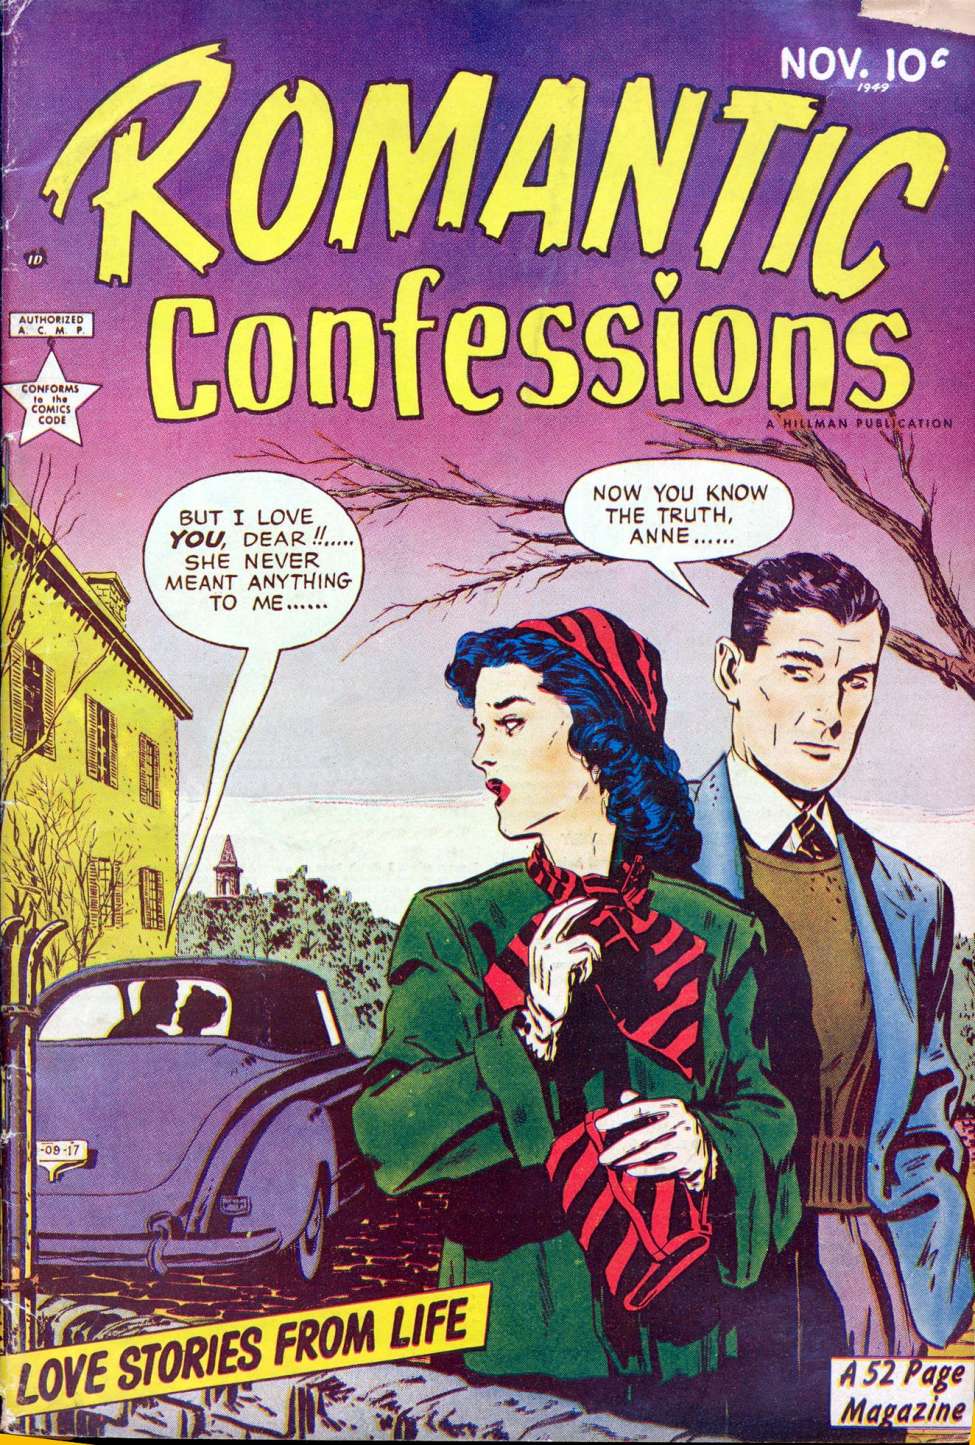 Book Cover For Romantic Confessions v1 2